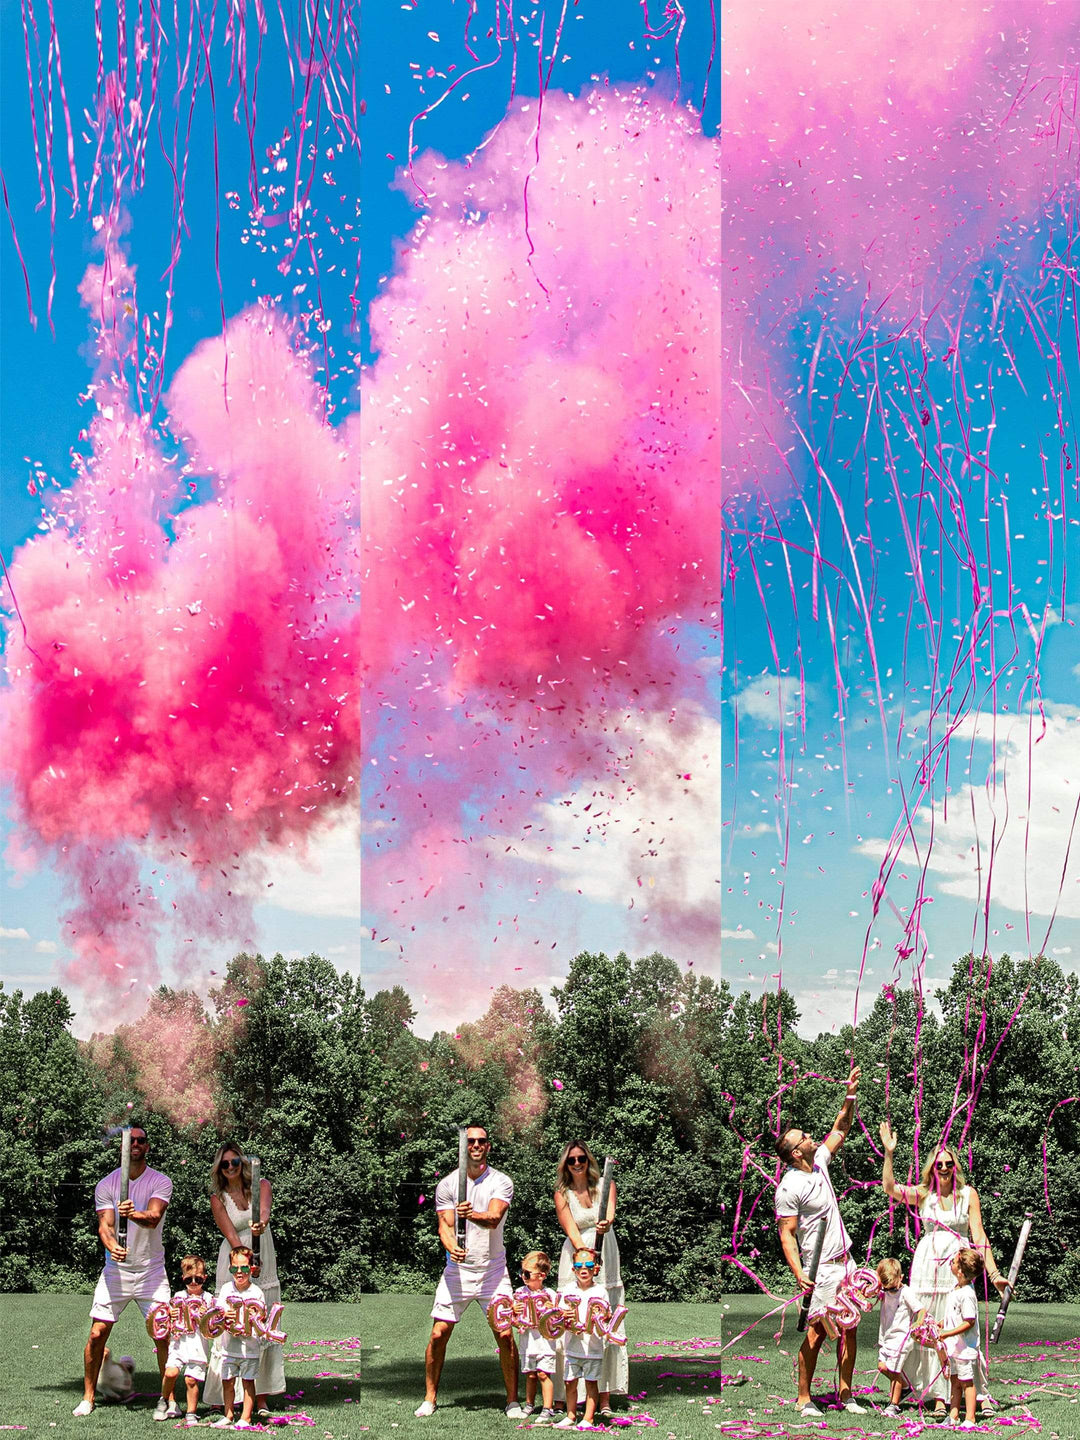 Gender Reveal Powder Cannons [4 Pack]